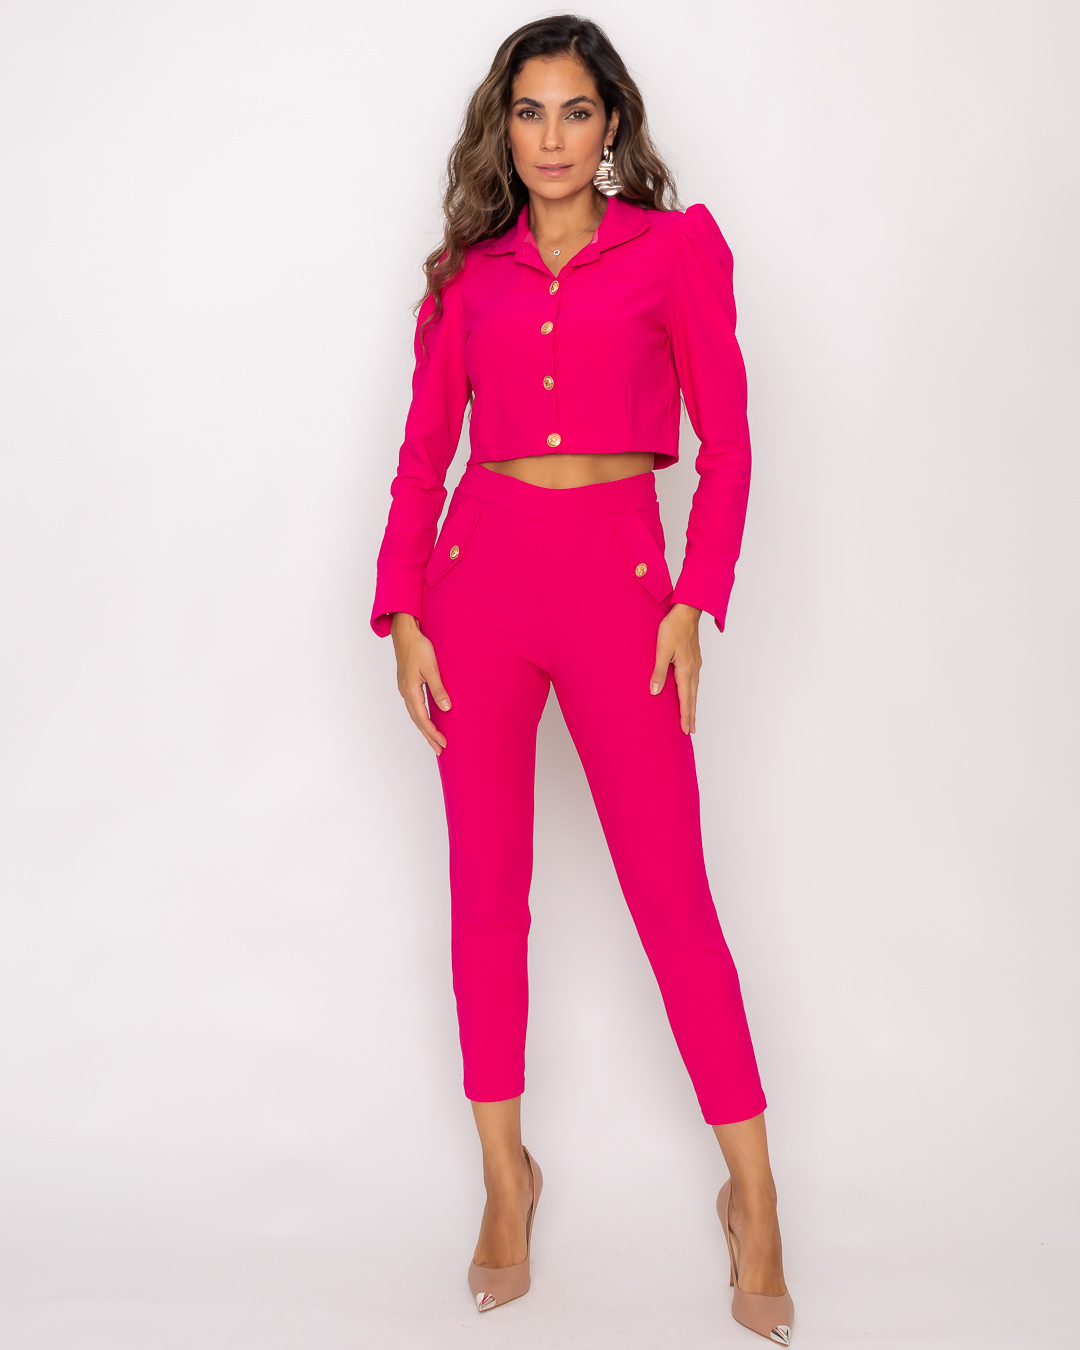 Miss Misses - Miss Misses Skinny Pants With Lapel and Pink Buttons - 19130054